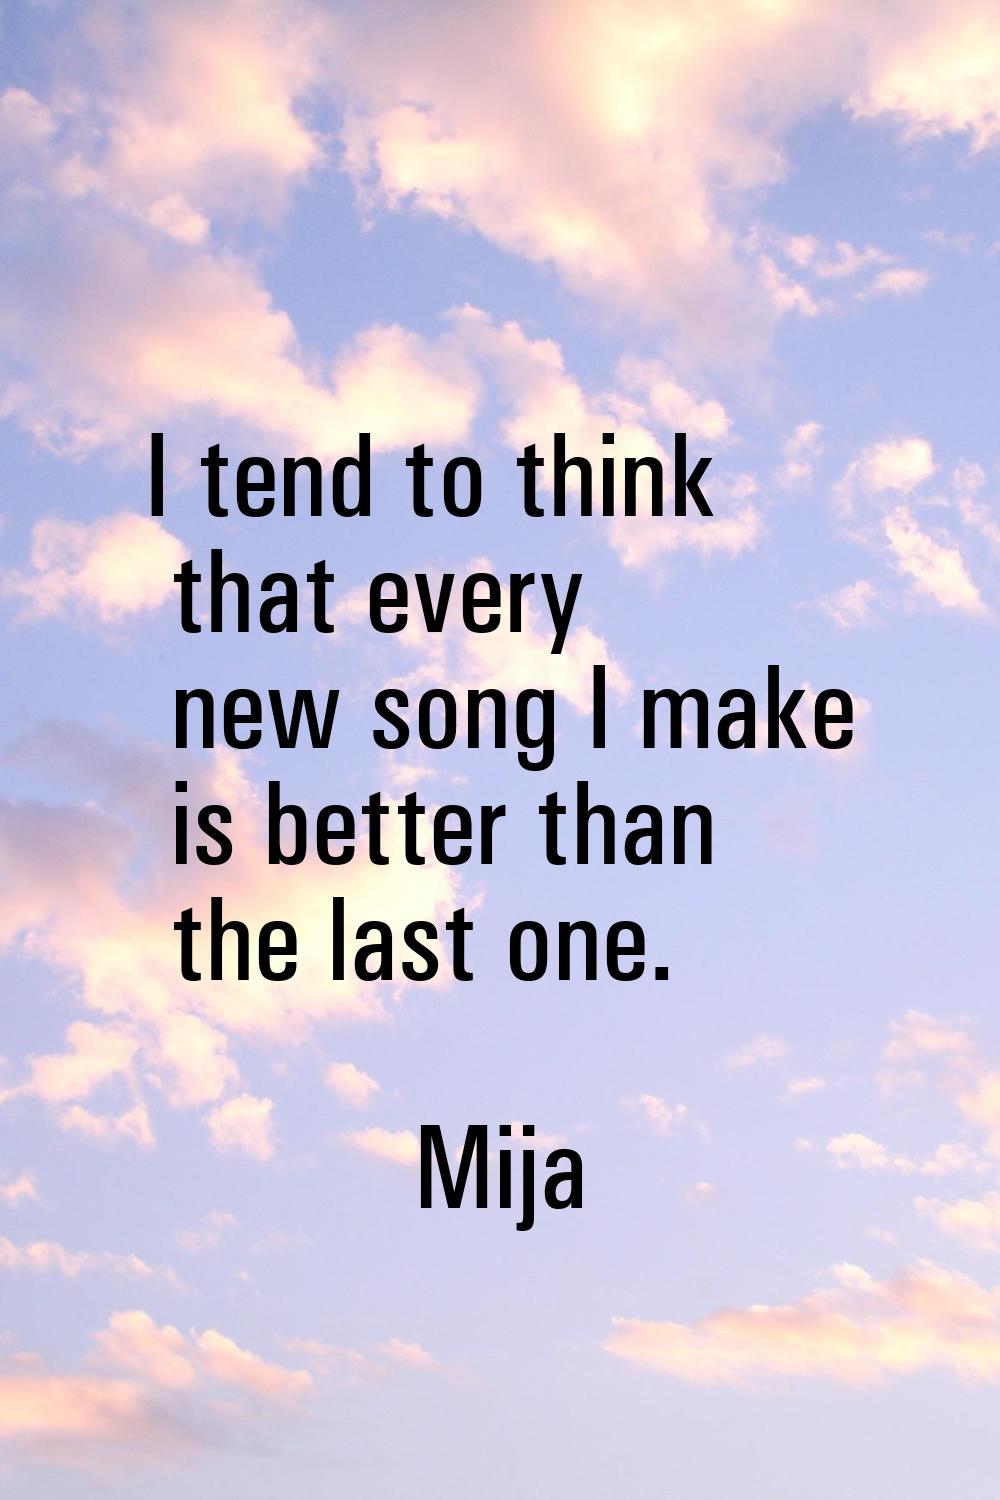 I tend to think that every new song I make is better than the last one.